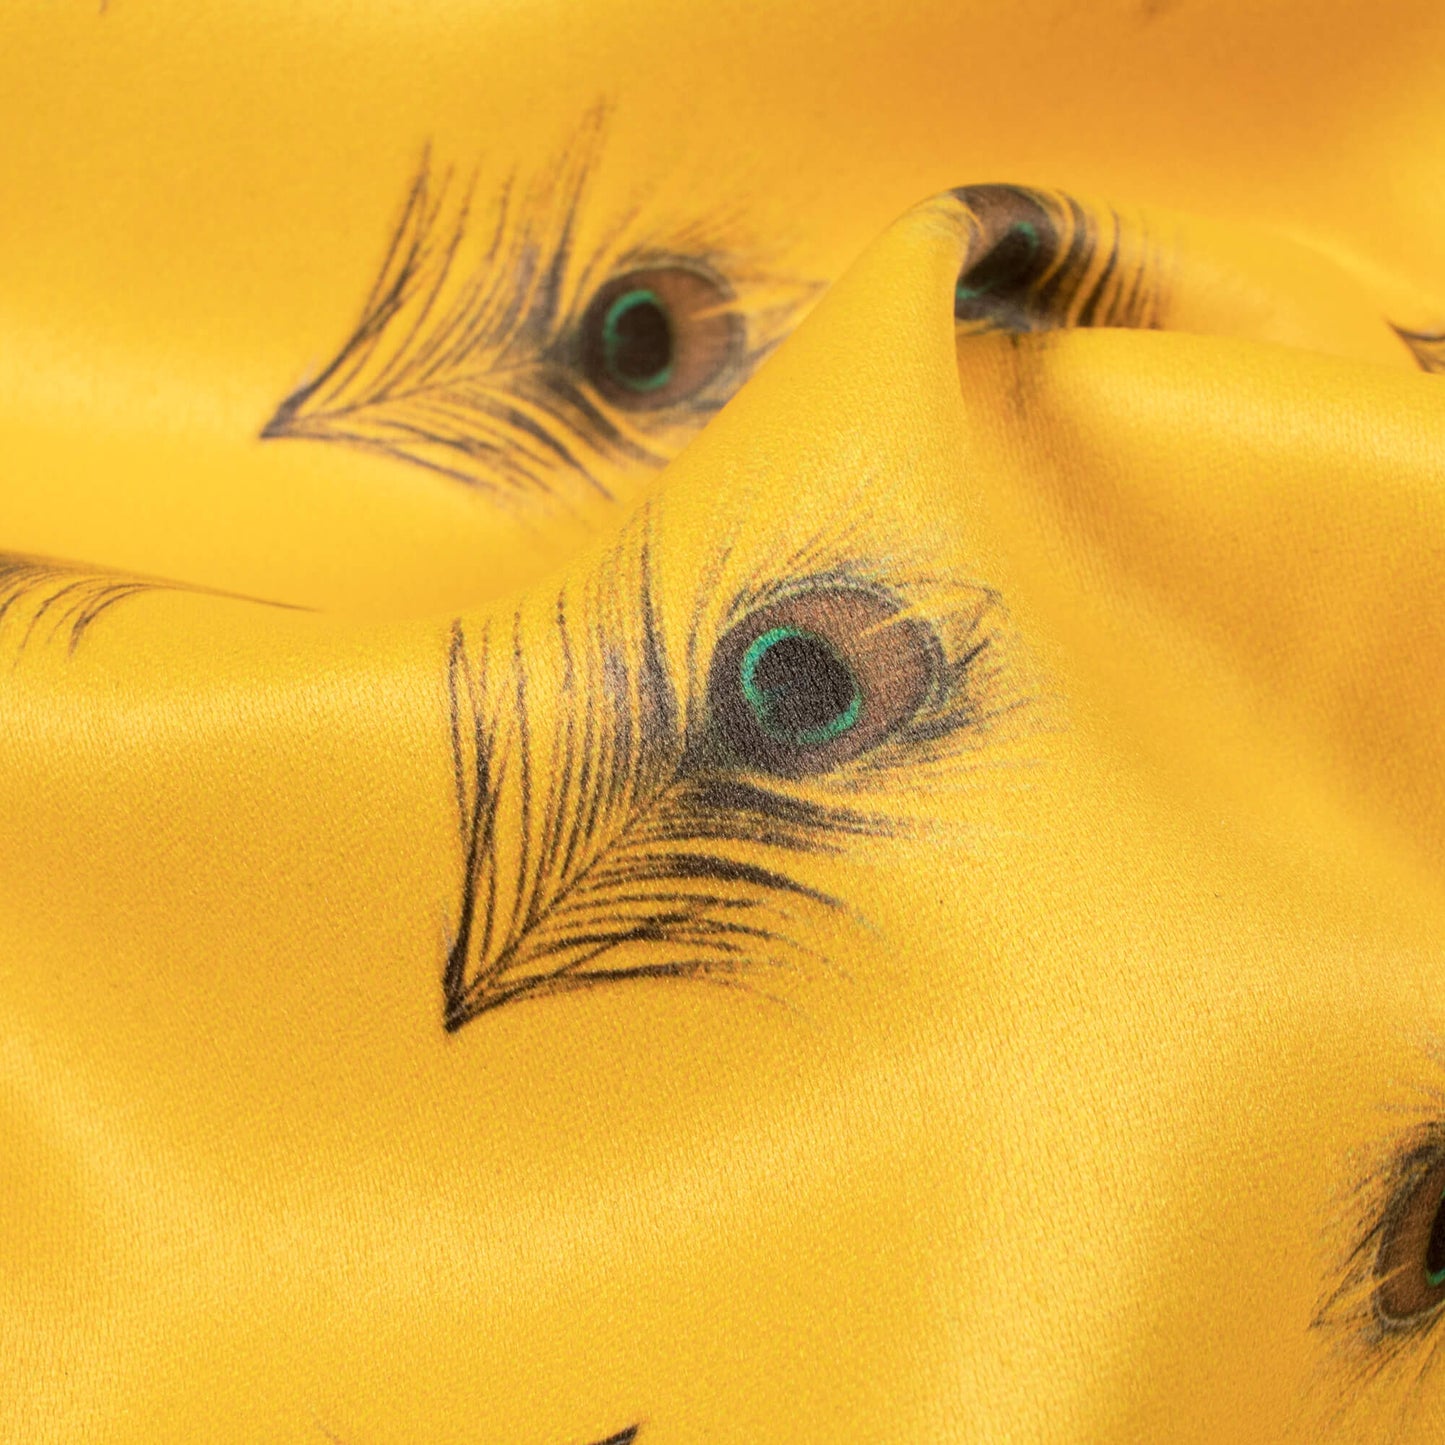 Honey Yellow Feather Printed Exclusive Shirting Fabric